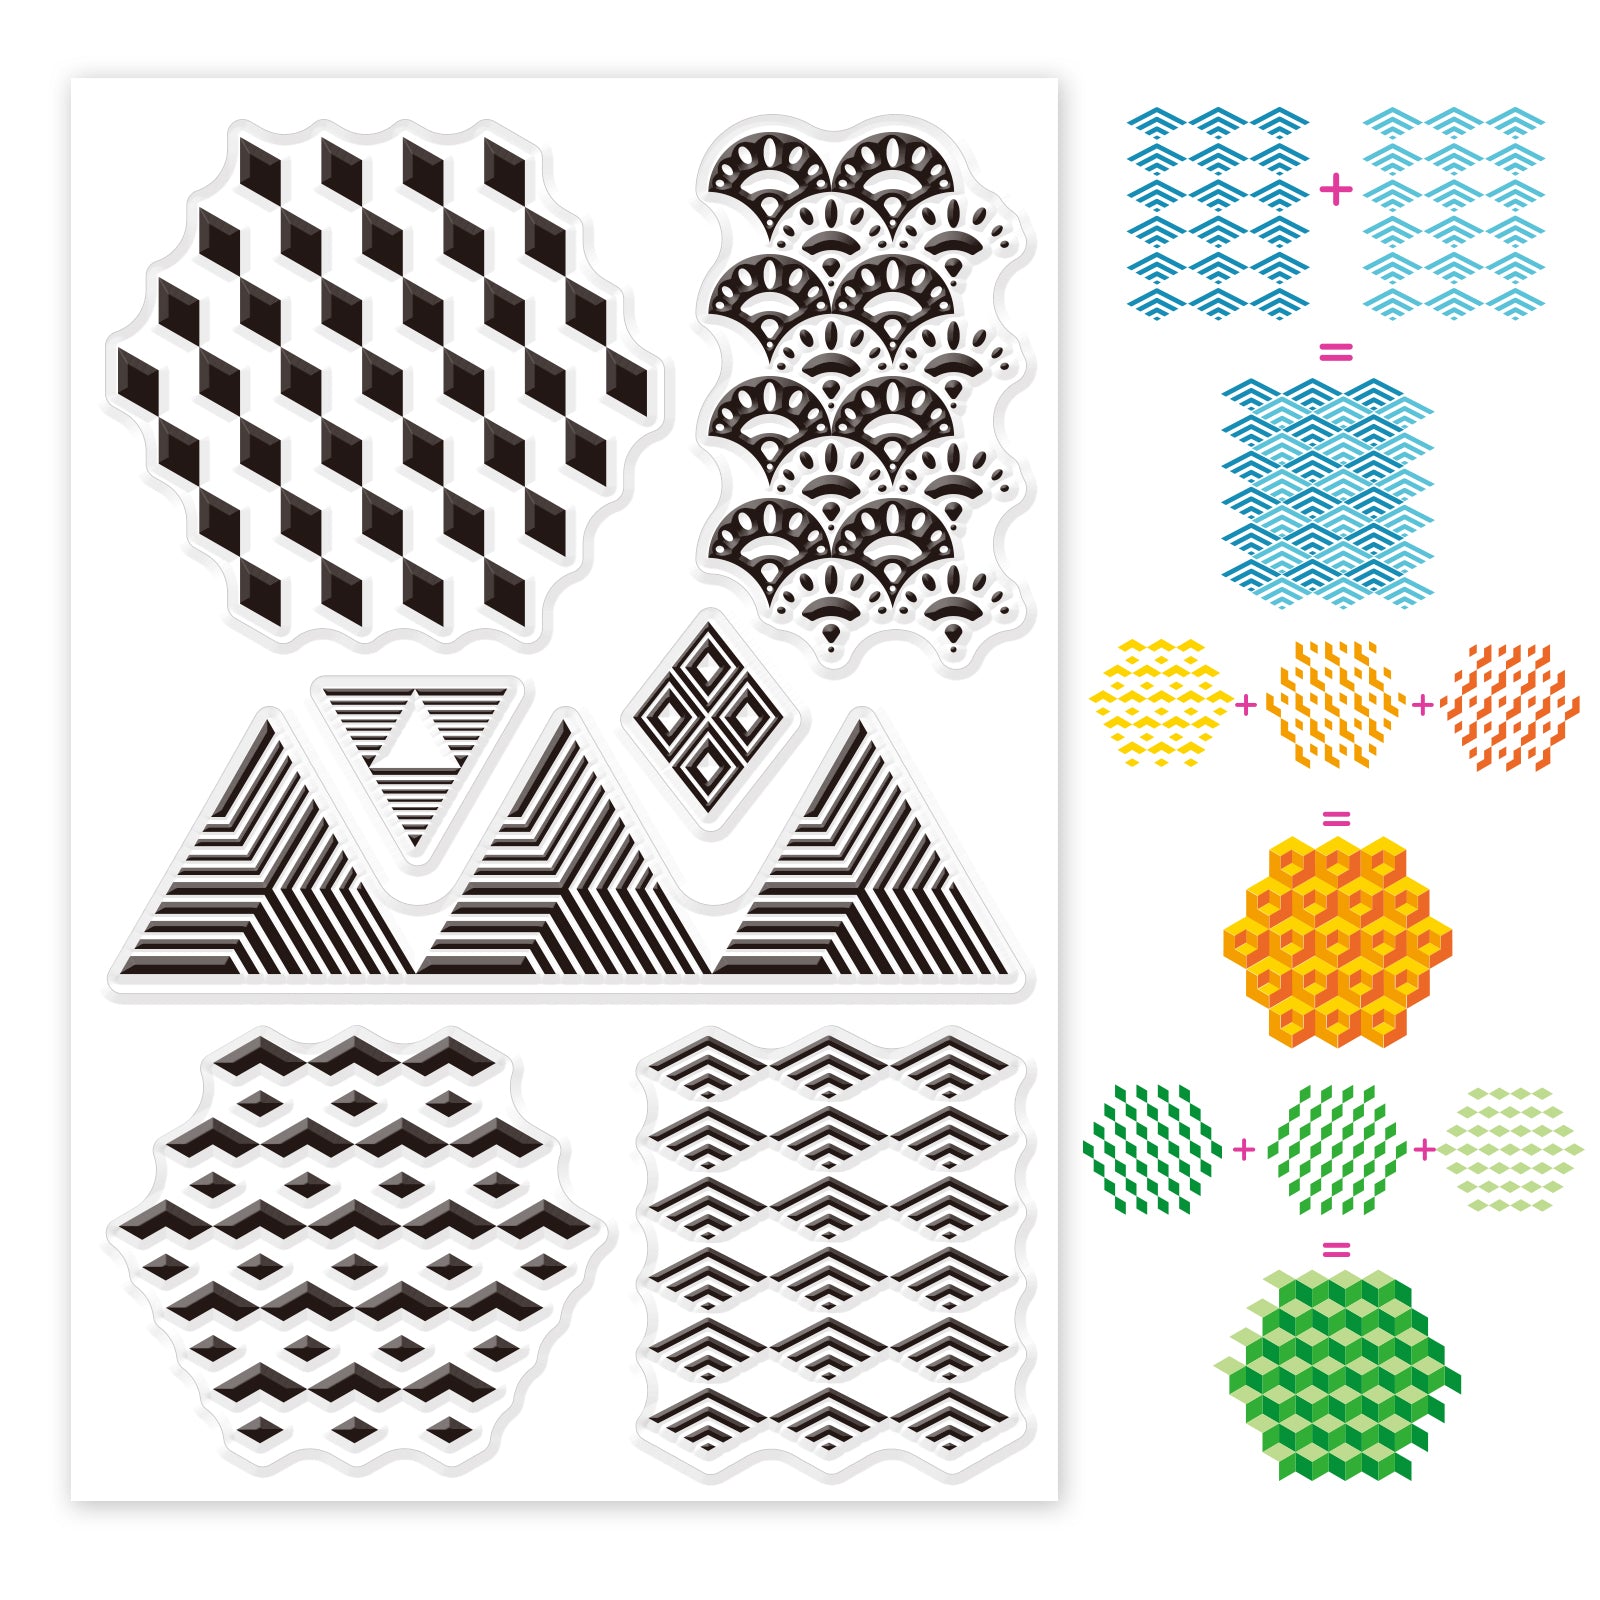 Background, Geometric Pattern, Repeating Collage Clear Silicone Stamp Seal for Card Making Decoration and DIY Scrapbooking